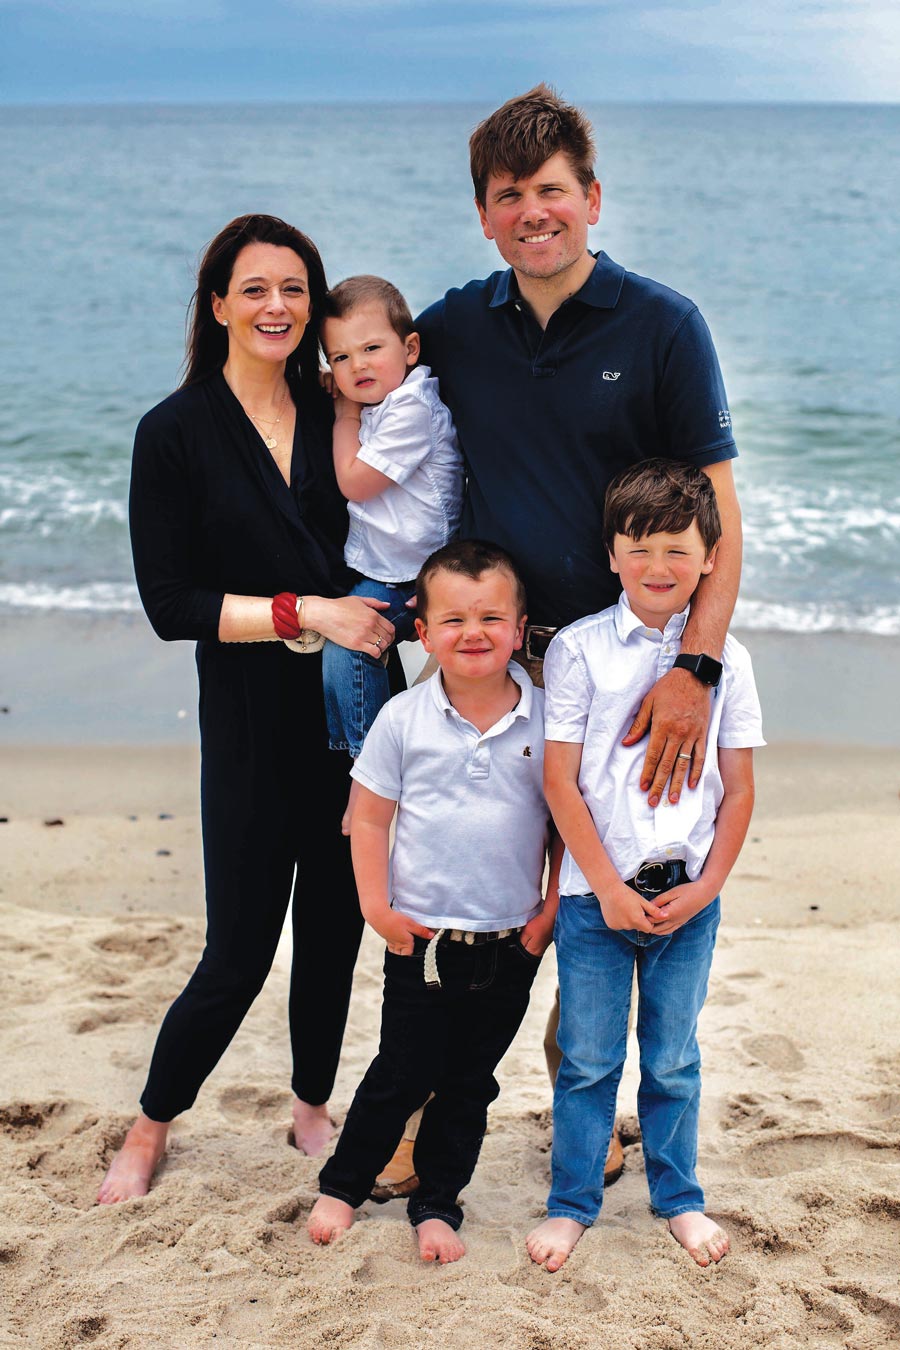 Matt '01 and Kate Foy Cole '03 and their three kids at the beach